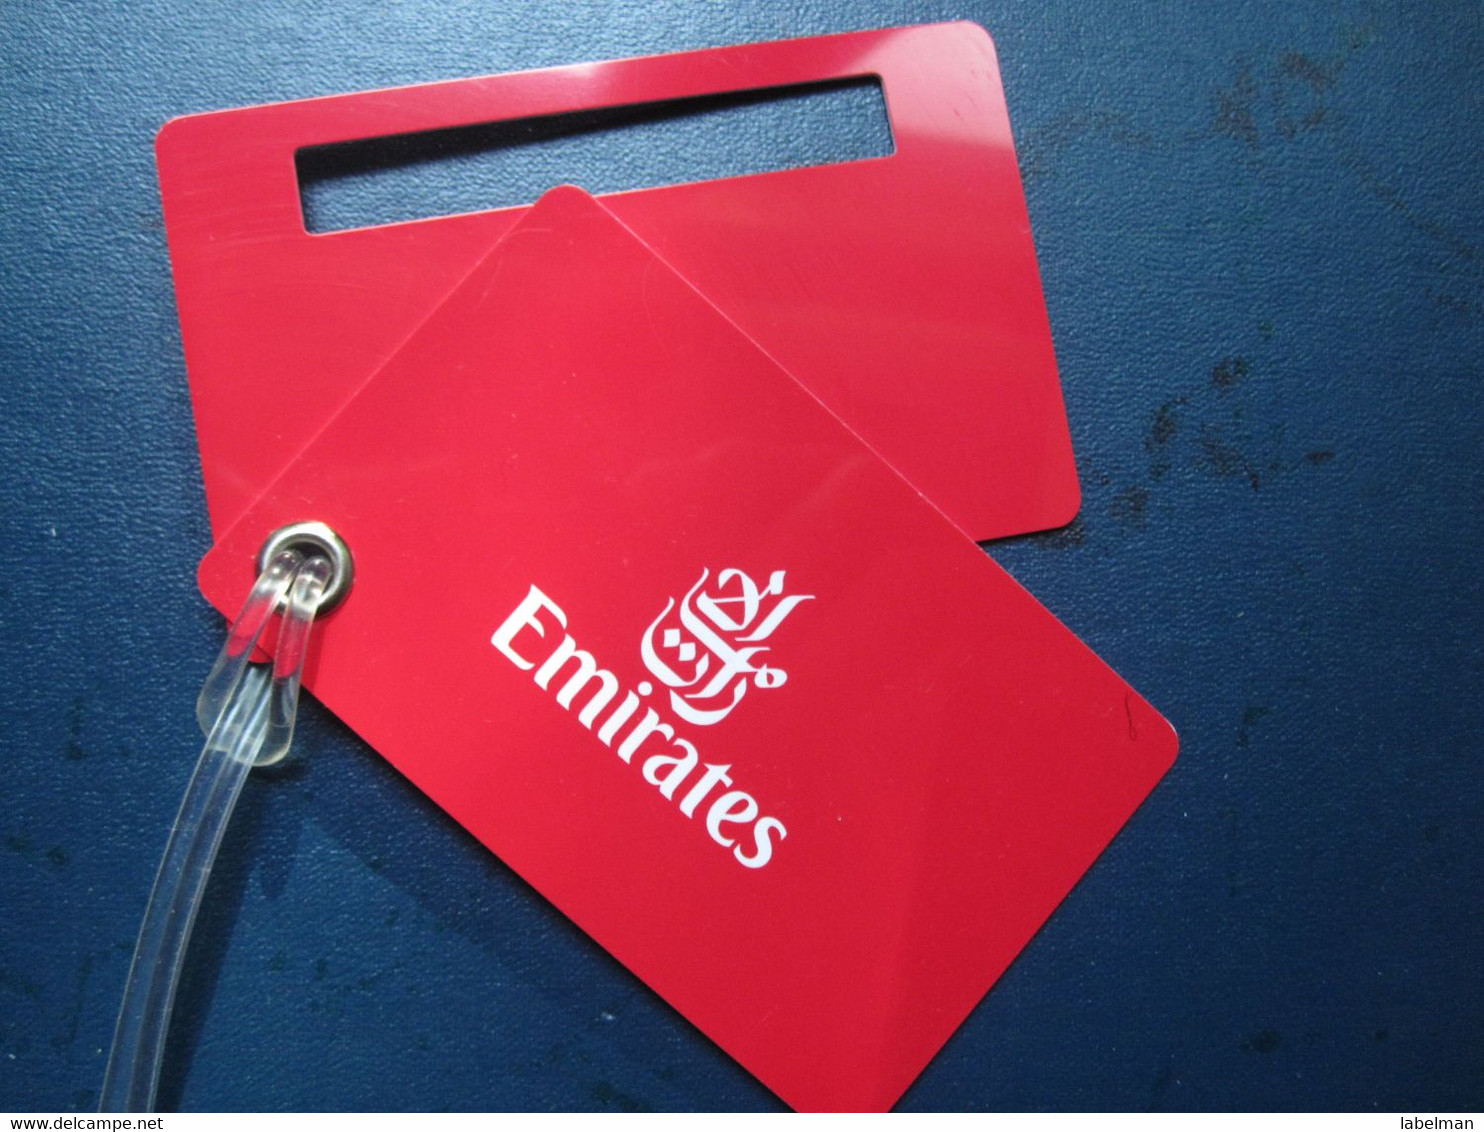 EMIRATES UAE UNITED ARABS CARD WELCOME TICKET AIRWAYS AIRLINE STICKER LABEL TAG LUGGAGE BUGGAGE PLANE AIRCRAFT AIRPORT - Welt